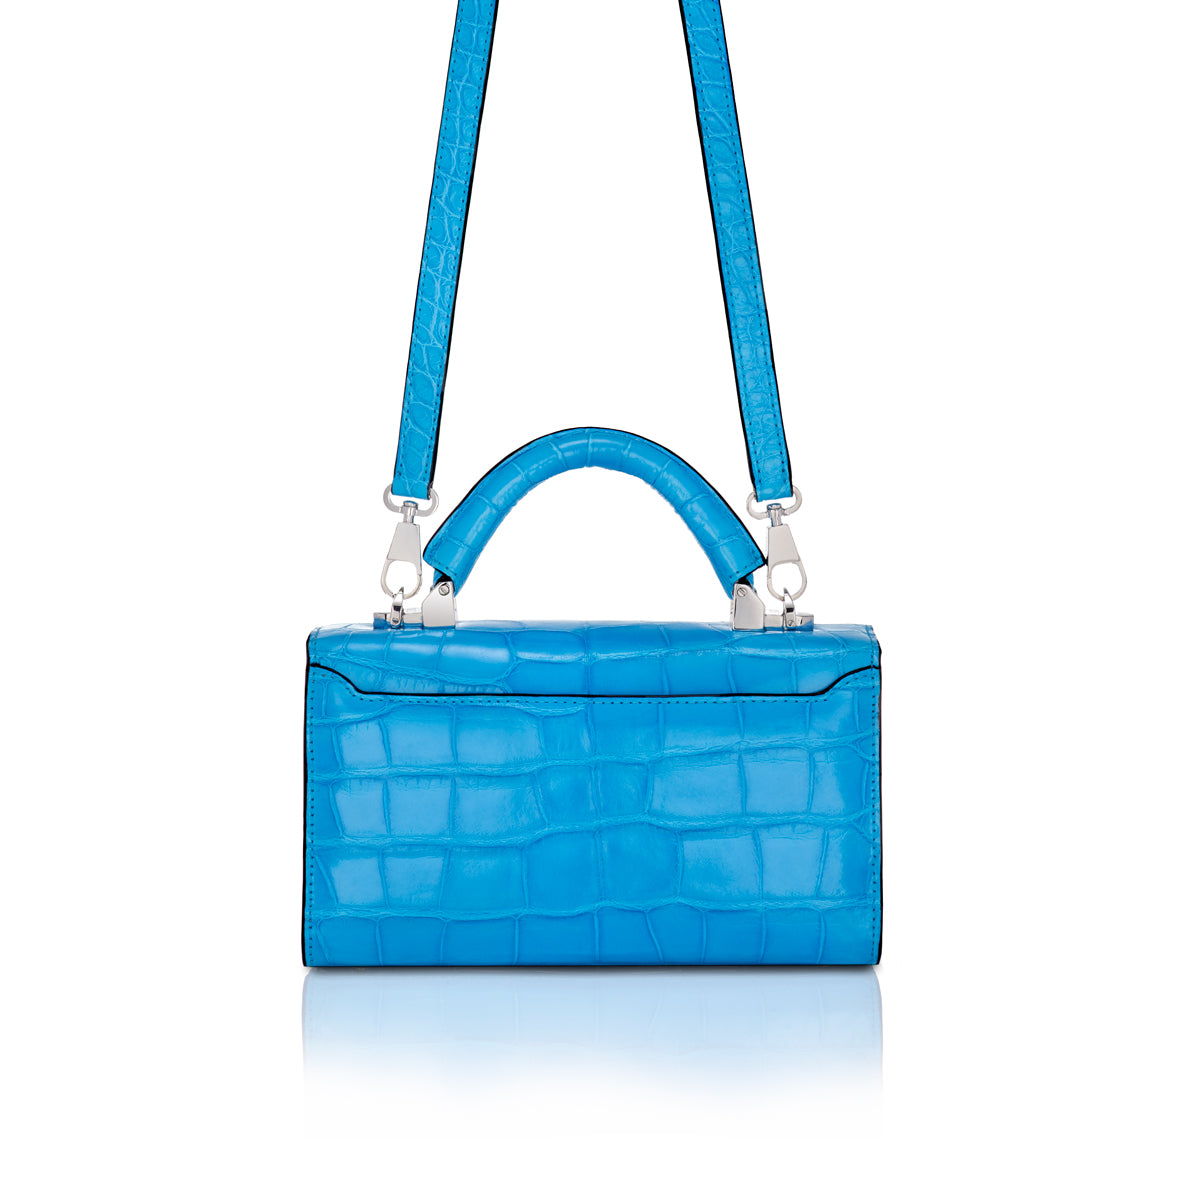 STALVEY Top Handle 2.0 Mini in Electric Blue Alligator with Palladium Hardware Back View